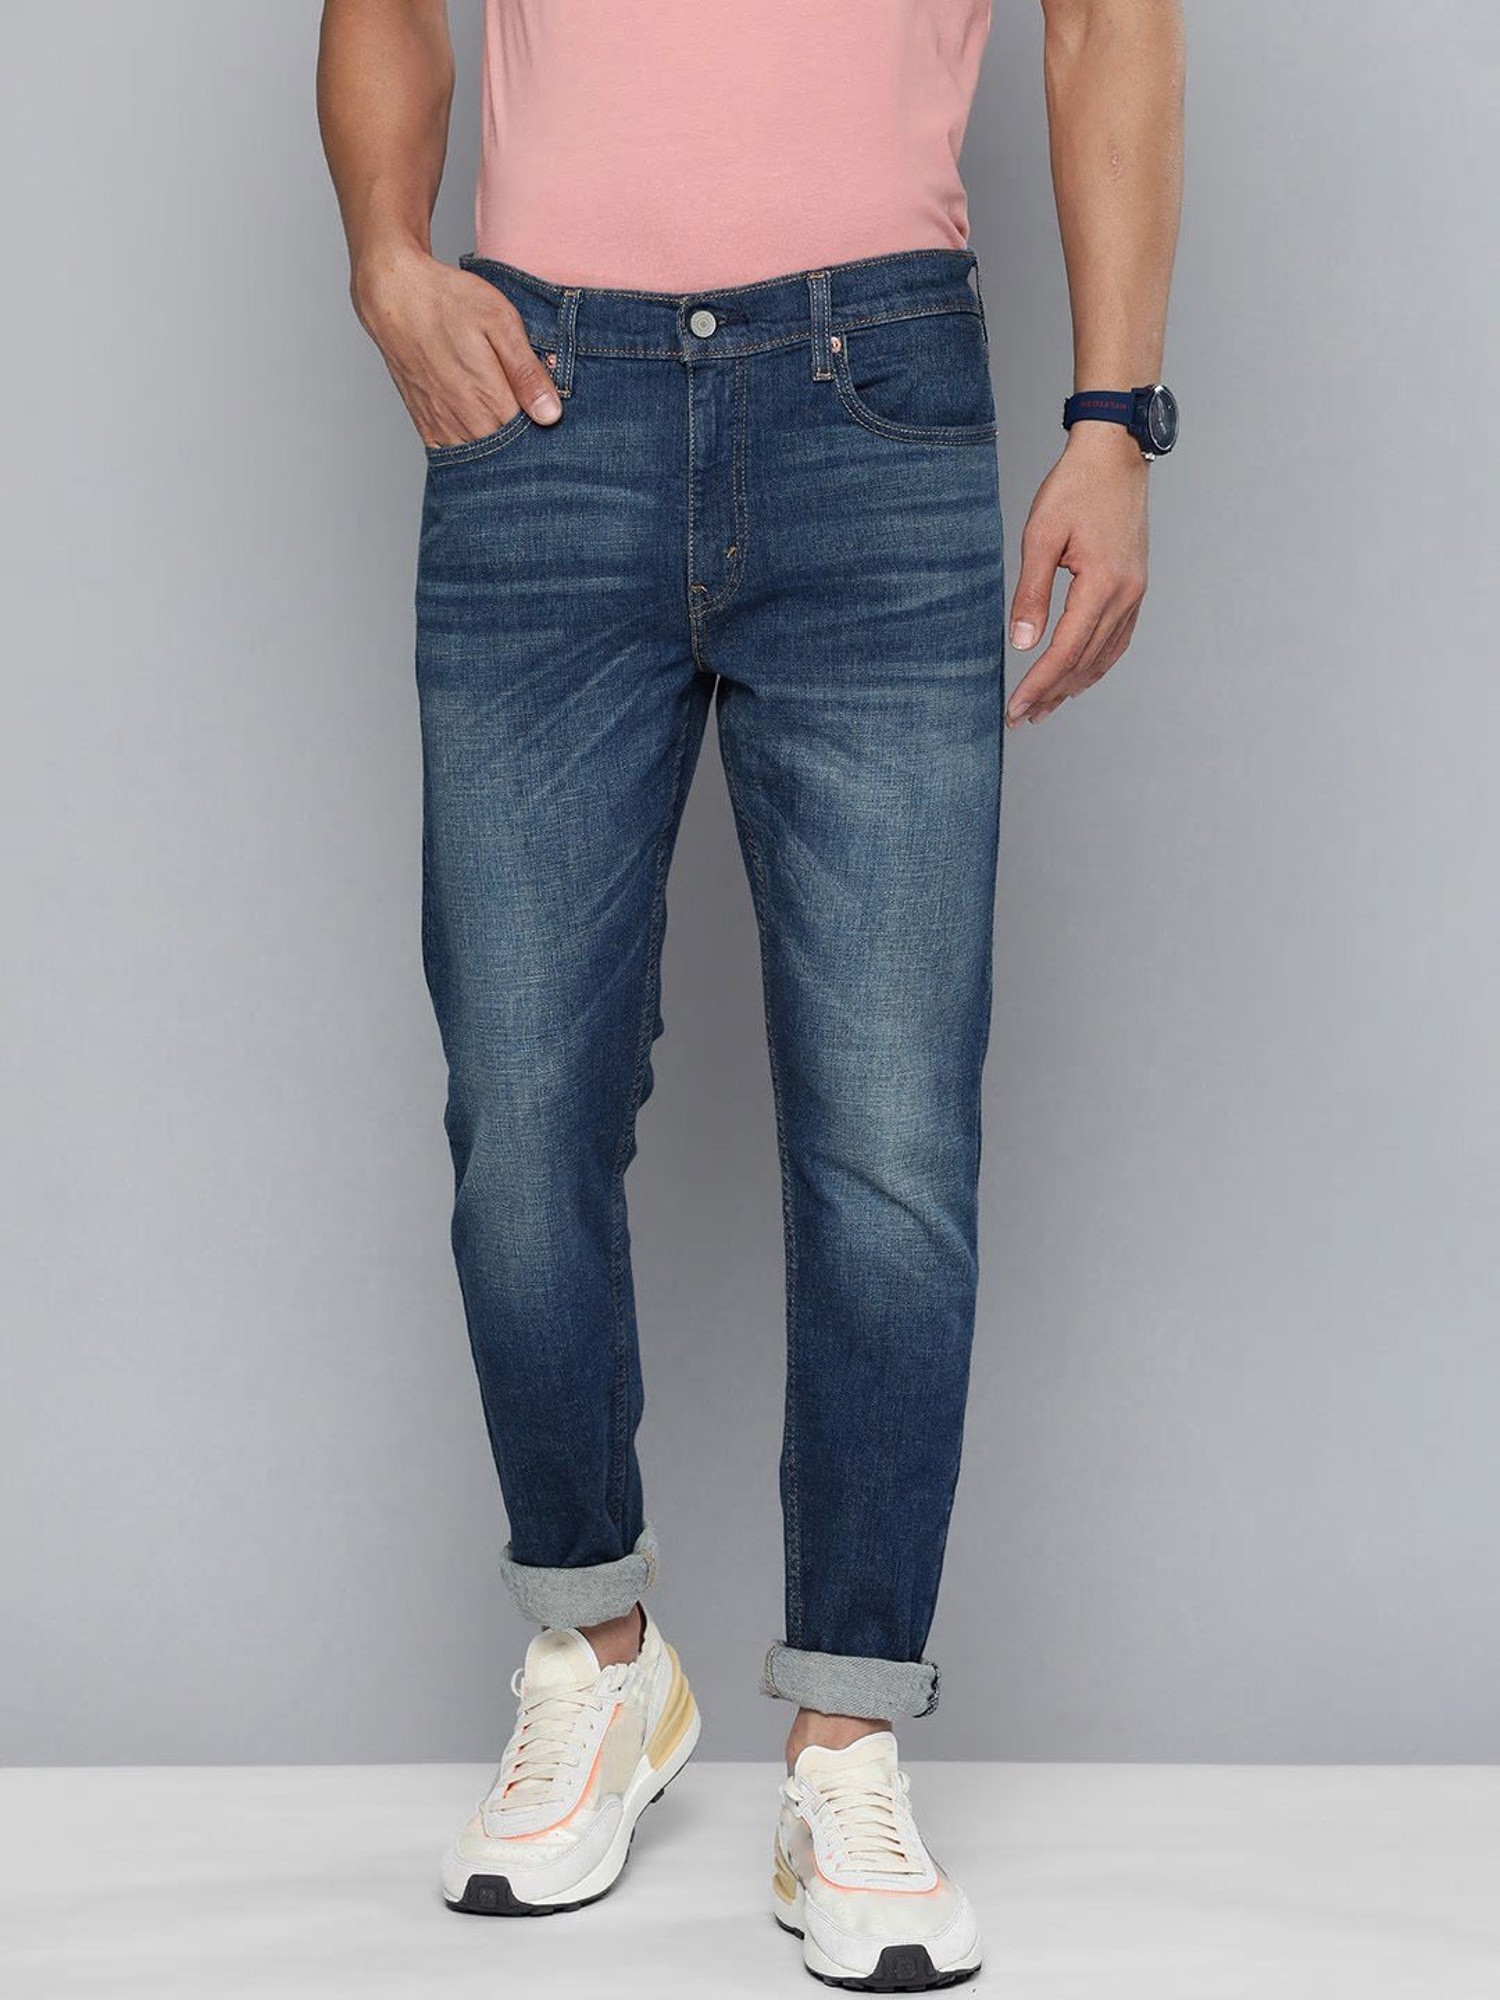 Buy Bare Denim Men's Washed Mid-Rise Slim Jeans(Blue_32) at Amazon.in